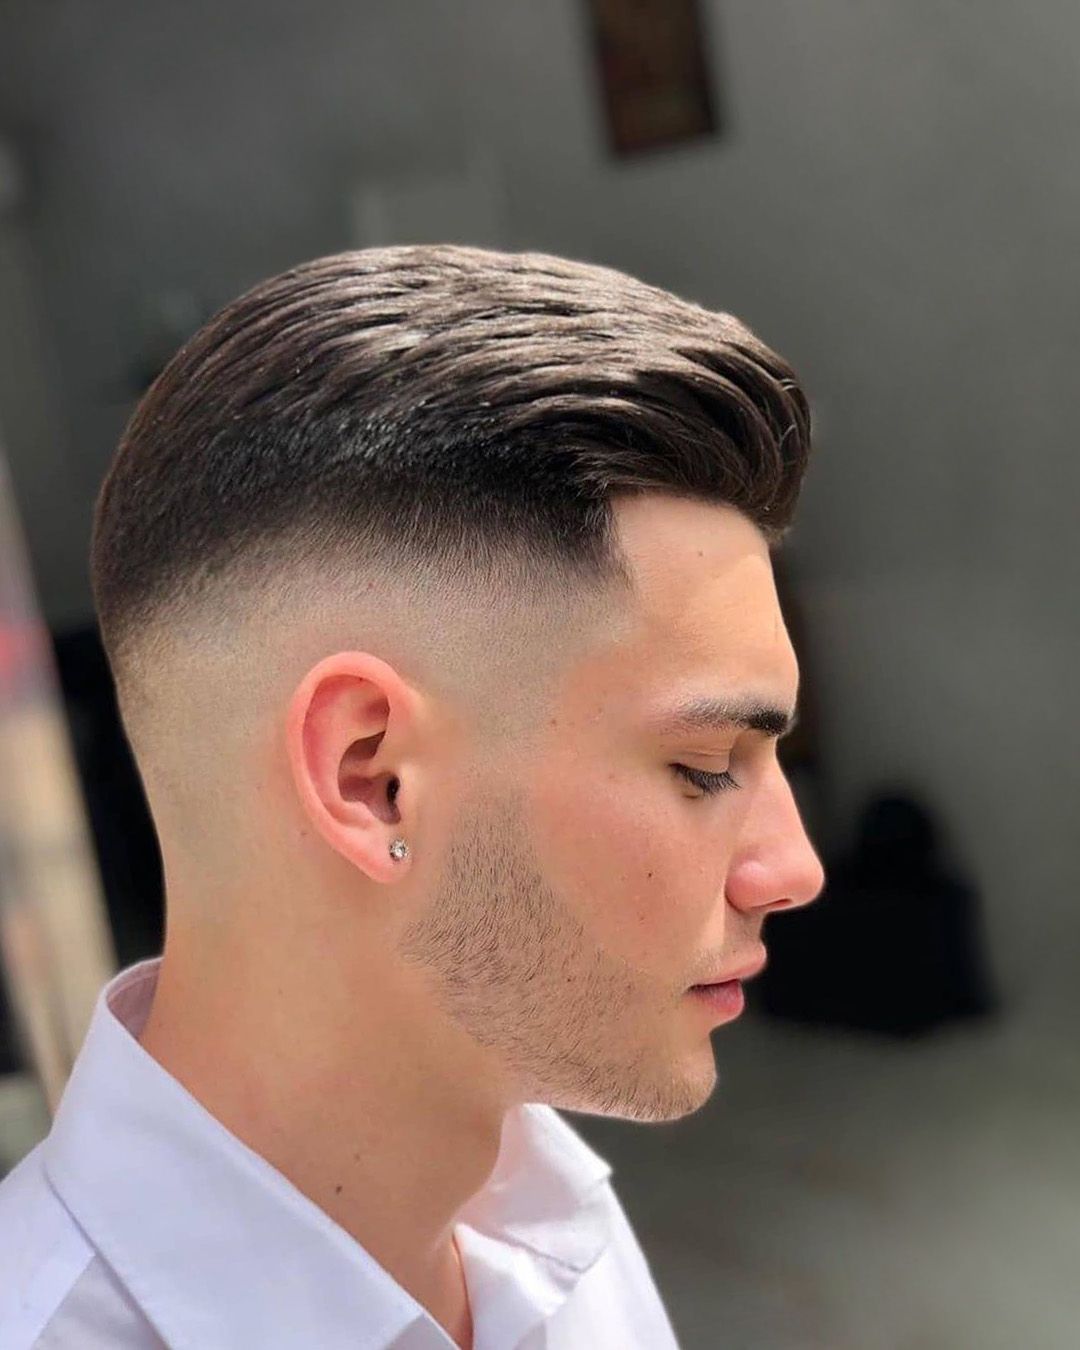 Low Skin Fade Haircut The Latest Trend In Mens Hairstyle